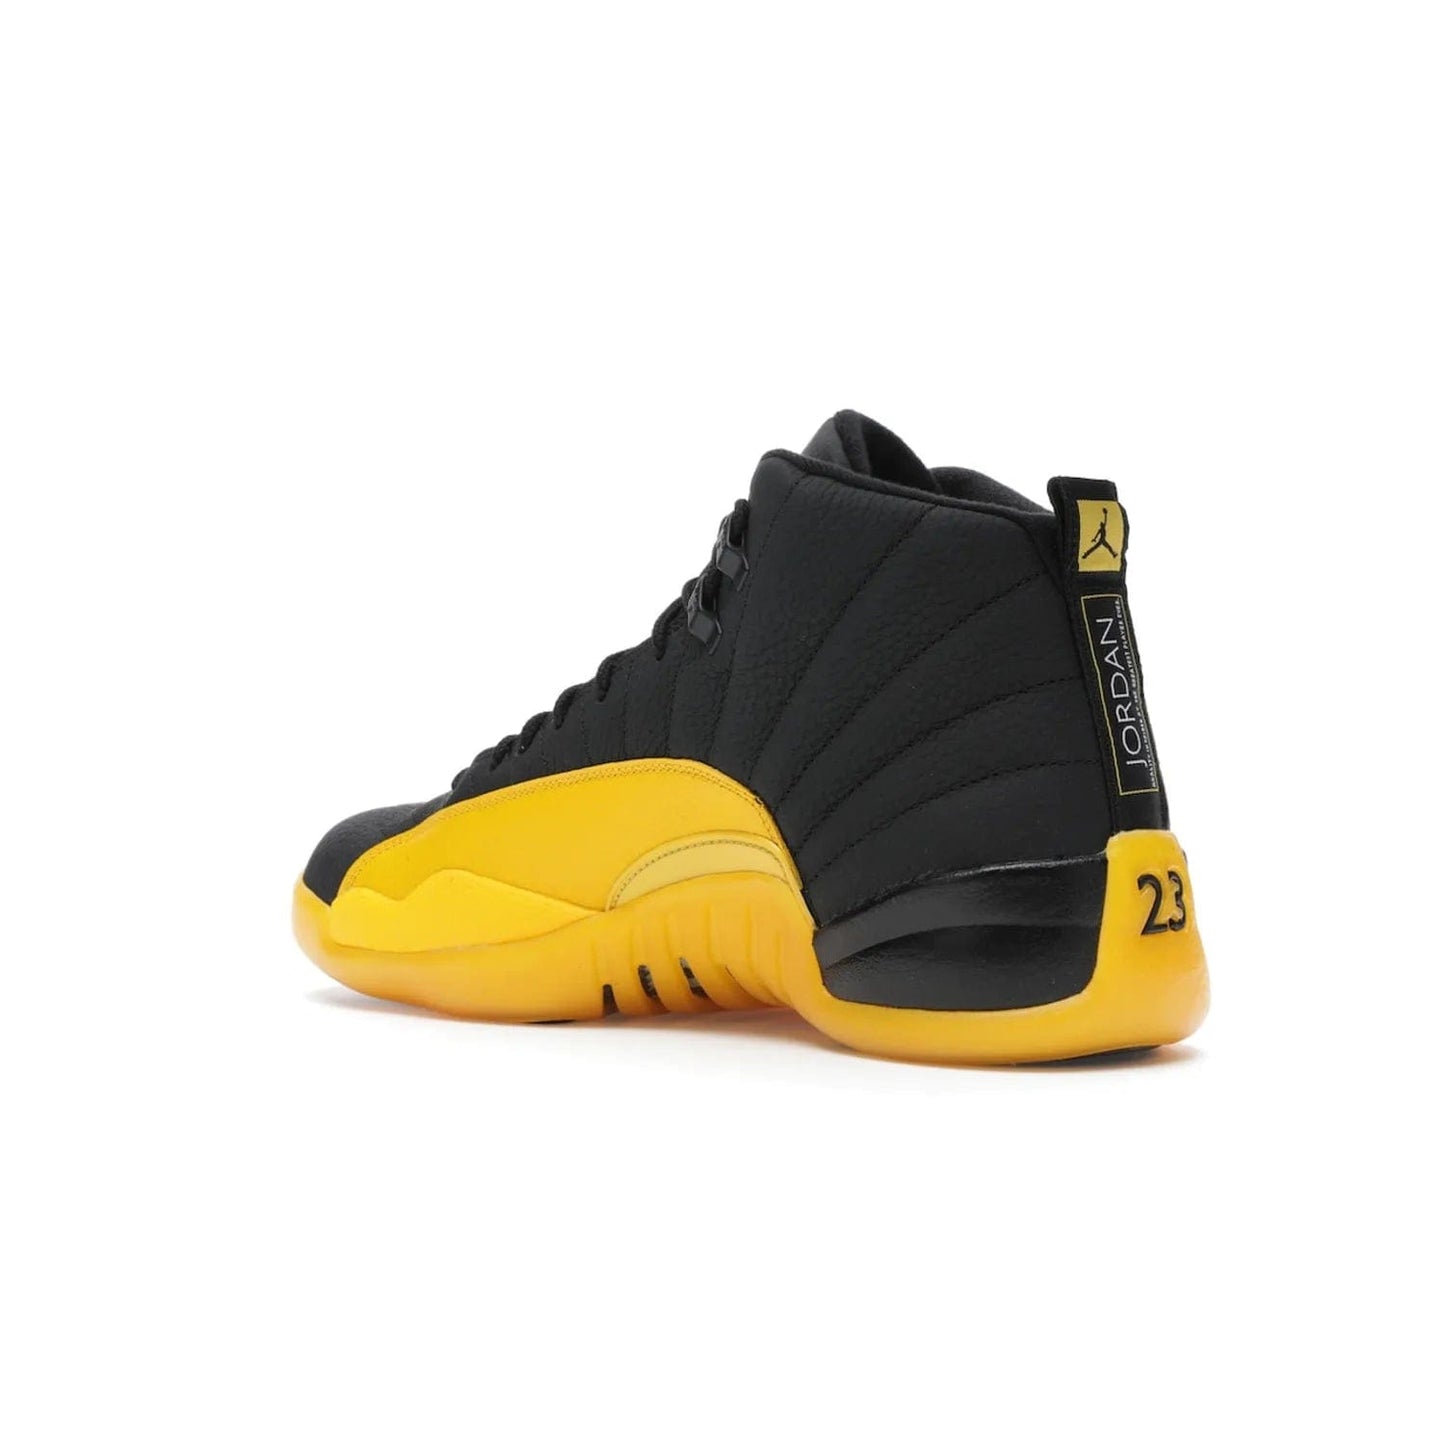 Jordan 12 Retro Black University Gold - Image 23 - Only at www.BallersClubKickz.com - This Jordan 12 Retro features a black tumbled leather upper and University Gold accents for a modern twist. Boasting Jordan "Two Three" branding and a yellow sole, these shoes will elevate your wardrobe. Fresh, sleek, and one of a kind - the Jordan 12 University Gold is your summer sneaker.